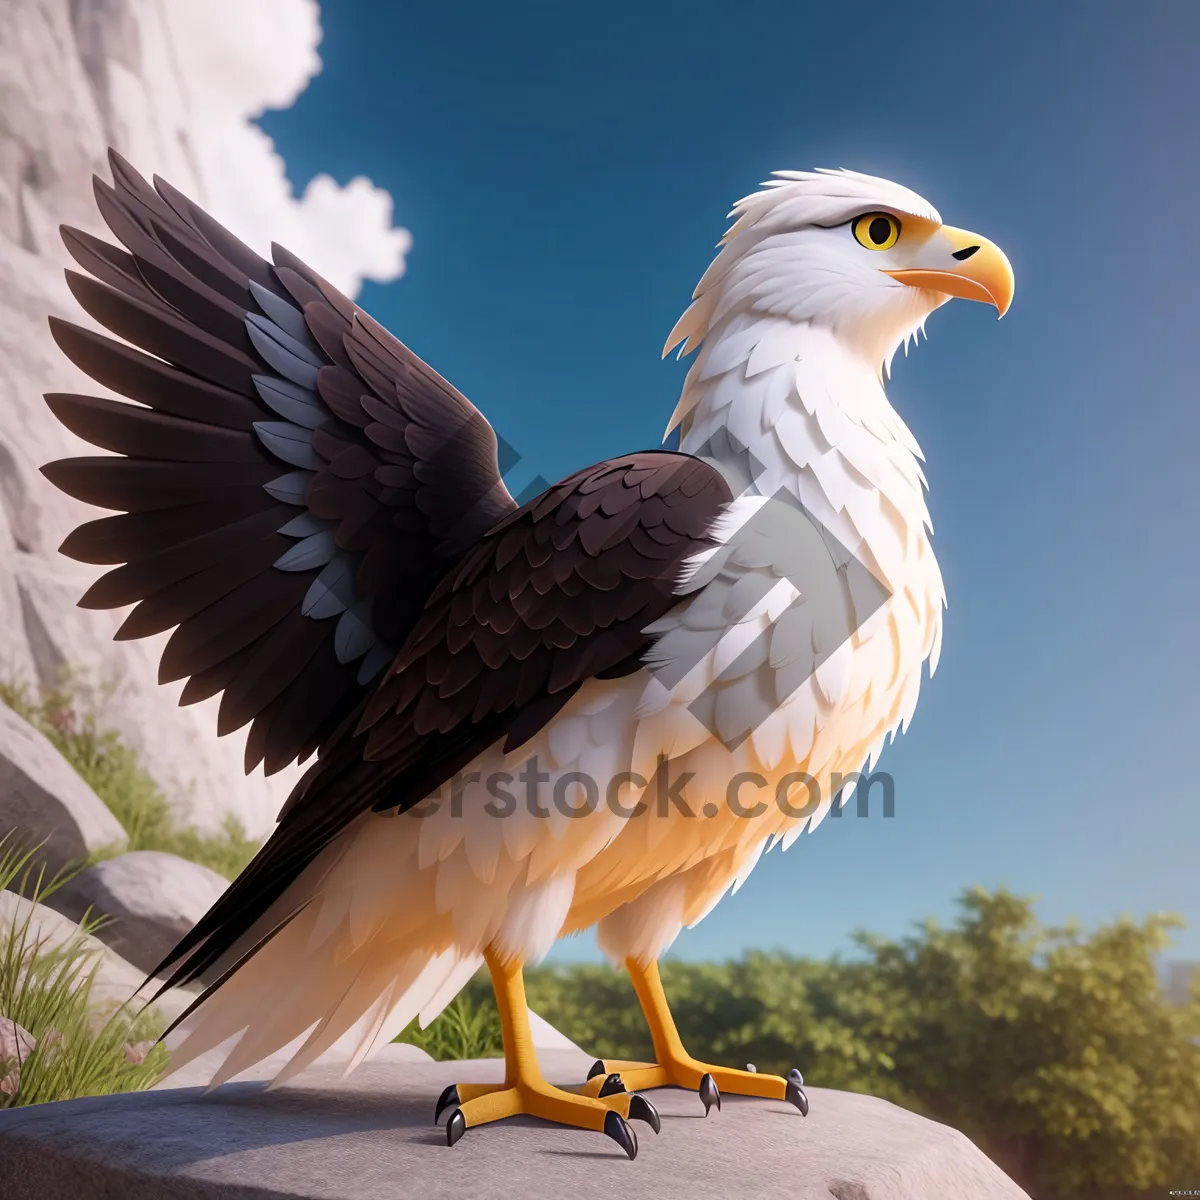 Picture of Majestic Bald Eagle in Flight